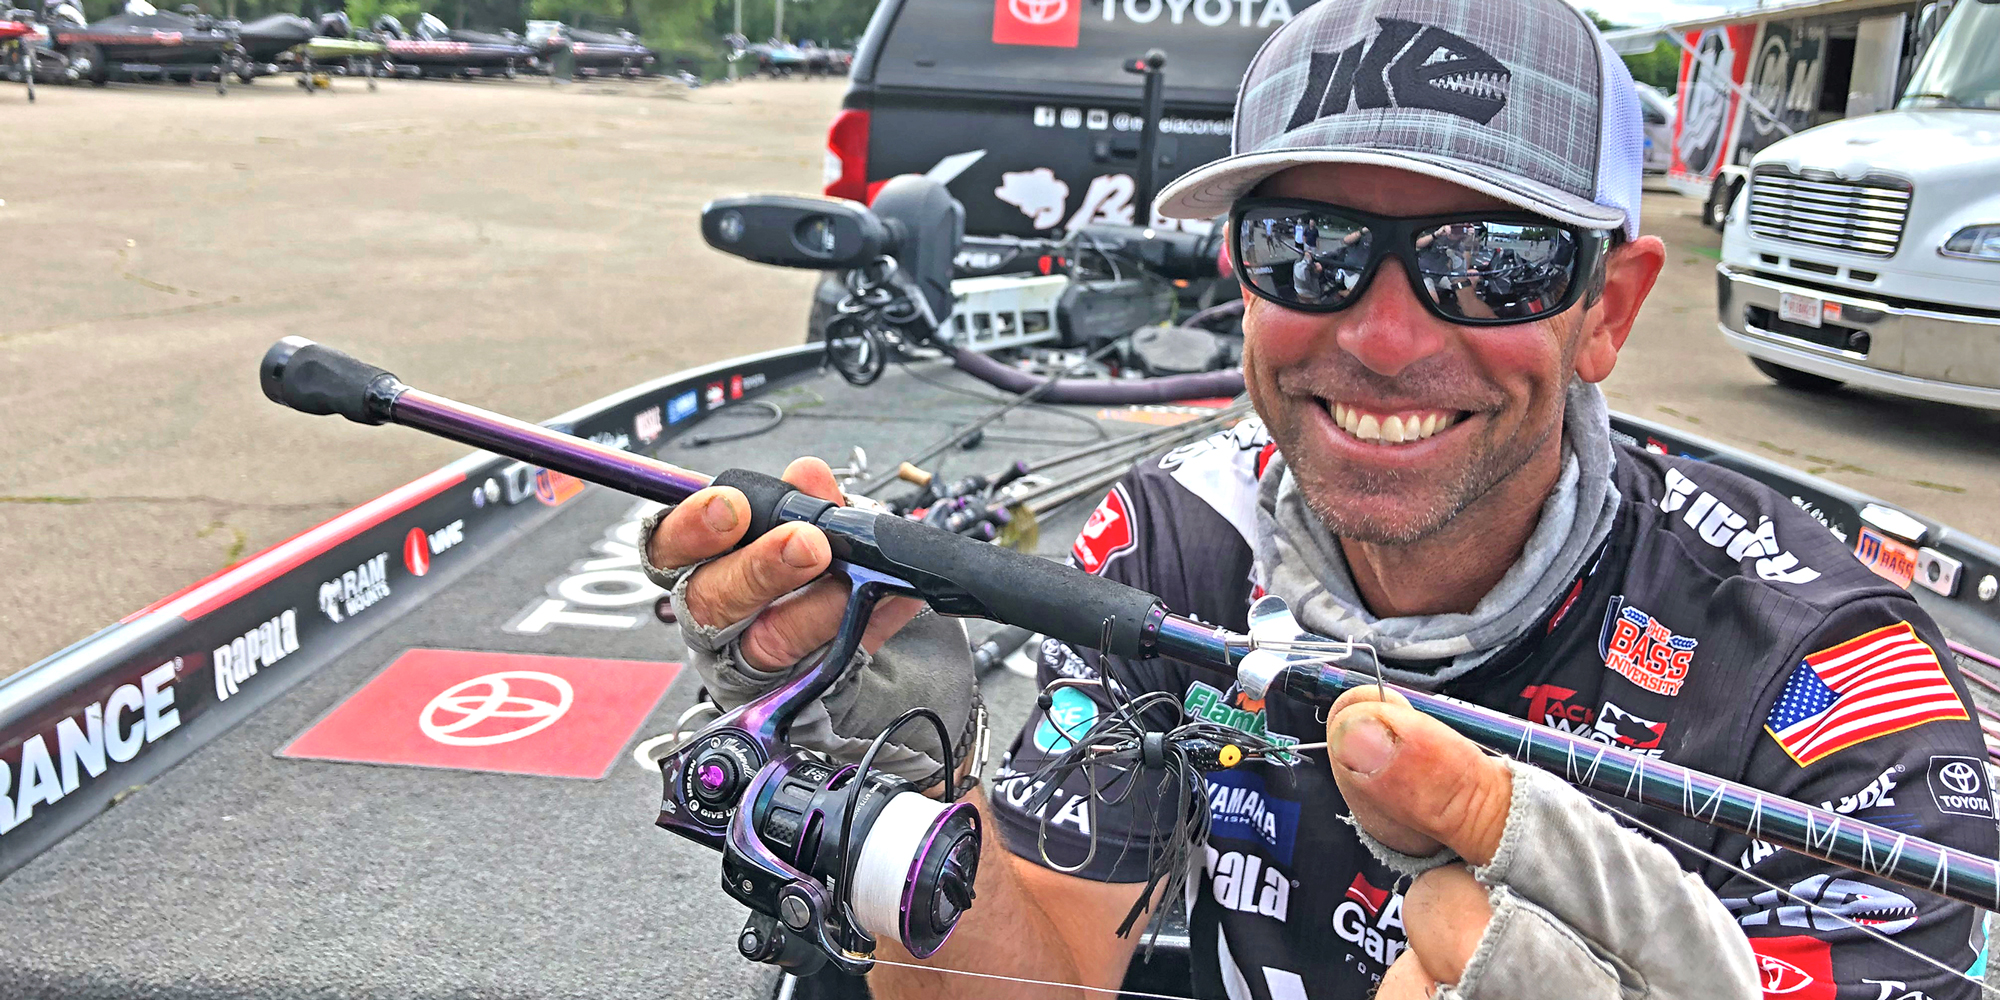 Brent Huskey on X: Try my new micro crankbait,the Tiny Fry